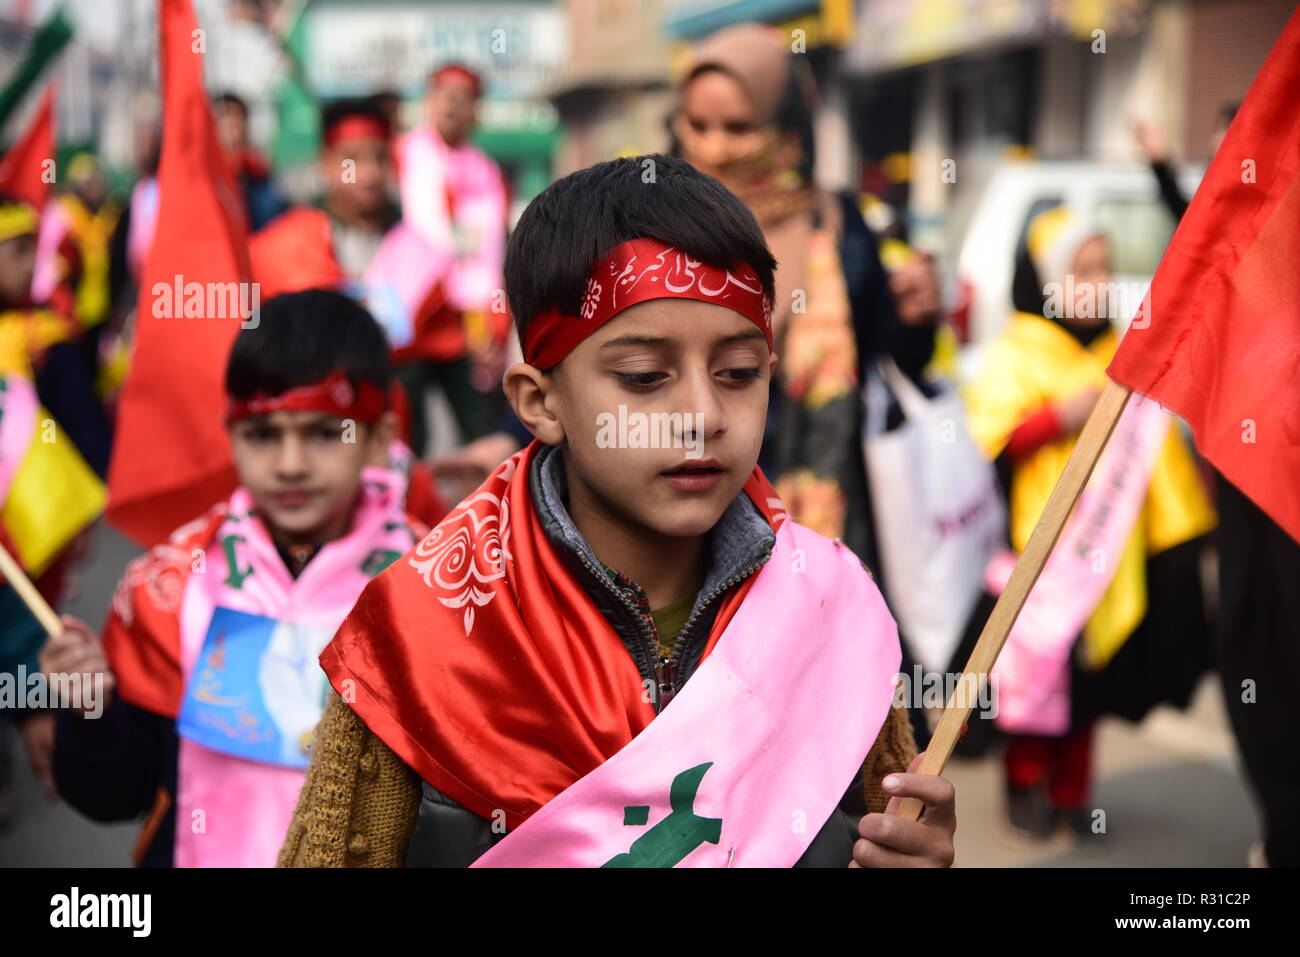 A Kashmiri Shia Muslim student seen looking on during a march rally marking Eid-i-Milad-un-Nabi, the birth anniversary of Prophet Muhammad PBUH. Muslims across the world celebrated Eid-e-Milad-un-Nabi, the birth anniversary of the Prophet Mohammed on 12 Rabil ul Awal, a month of the Muslim calendar which falls on 21 November 2018. Stock Photo